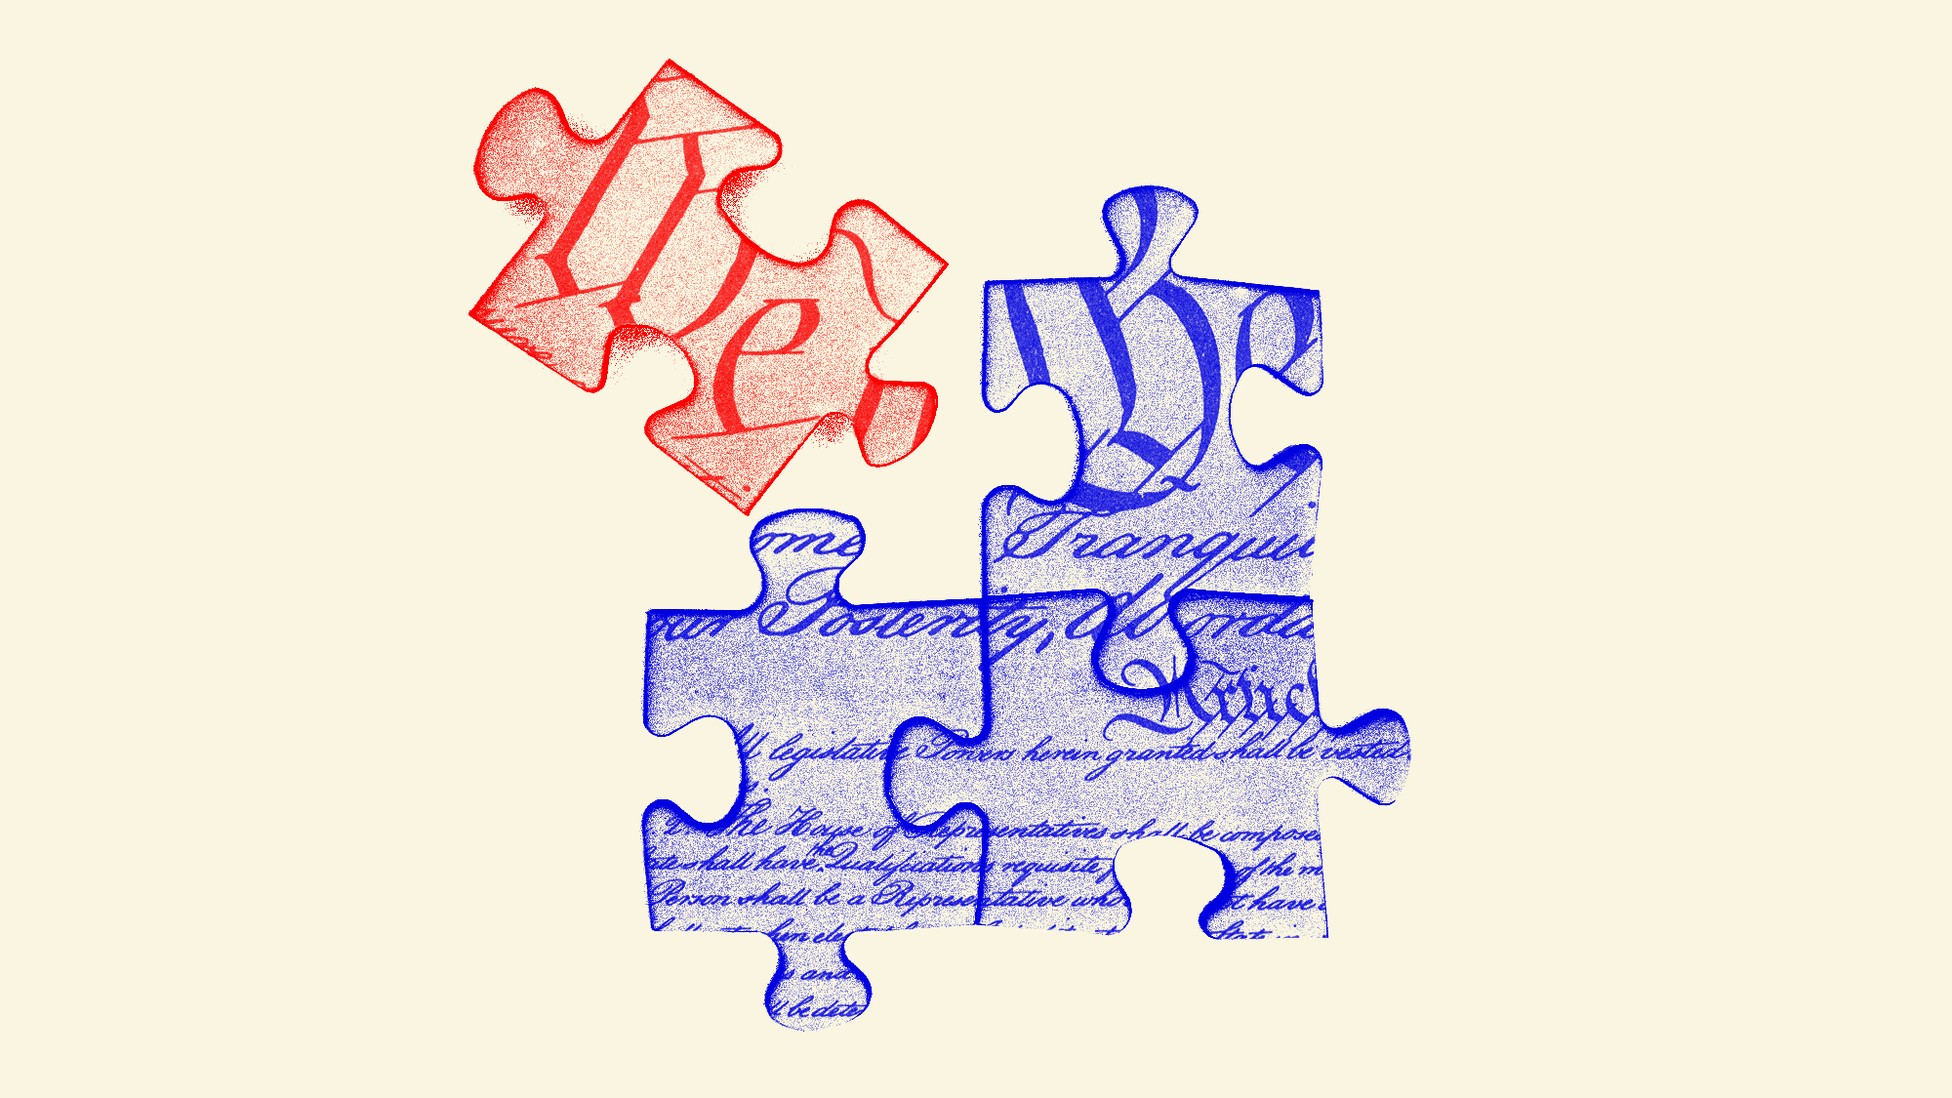 Graphic illustration showing puzzles pieces with words from the U.S. Constitution printed on them